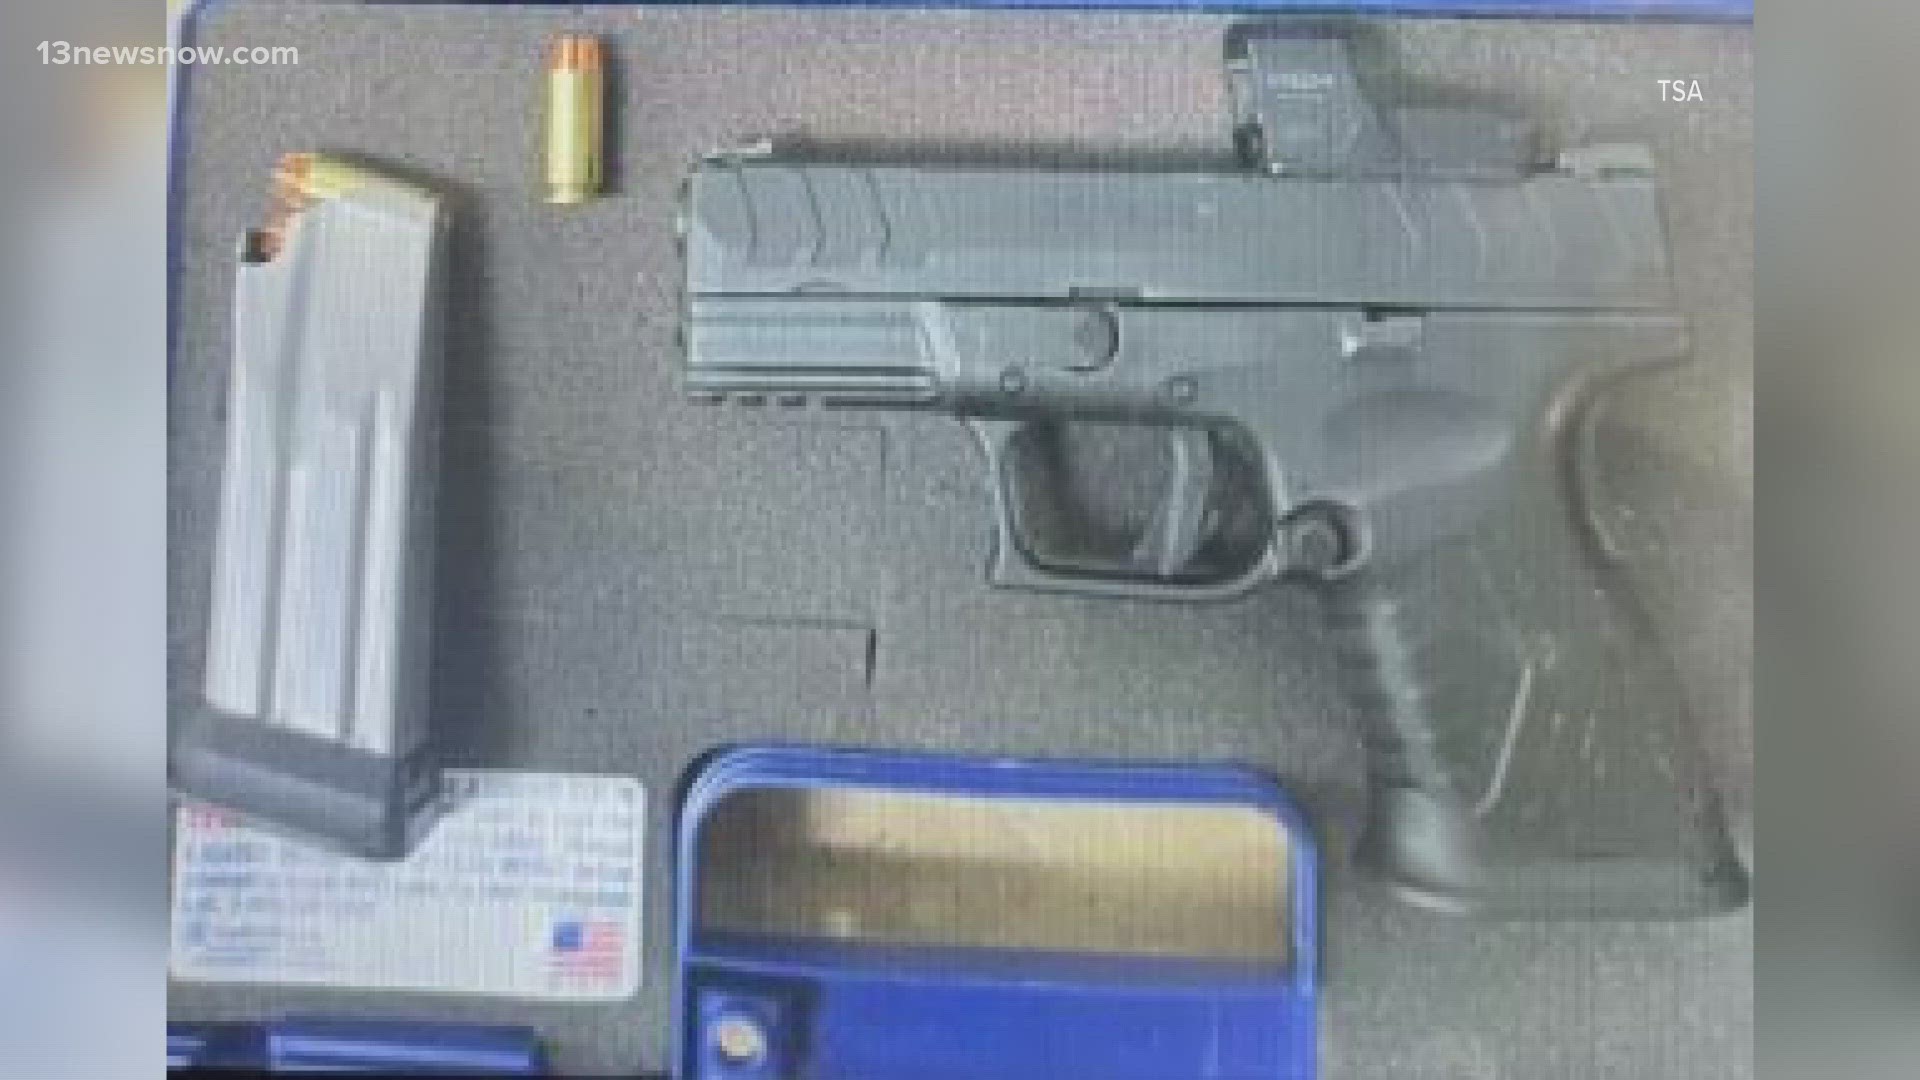 A North Carolina man faces a weapons charge and could pay a fine of up to $15,000.